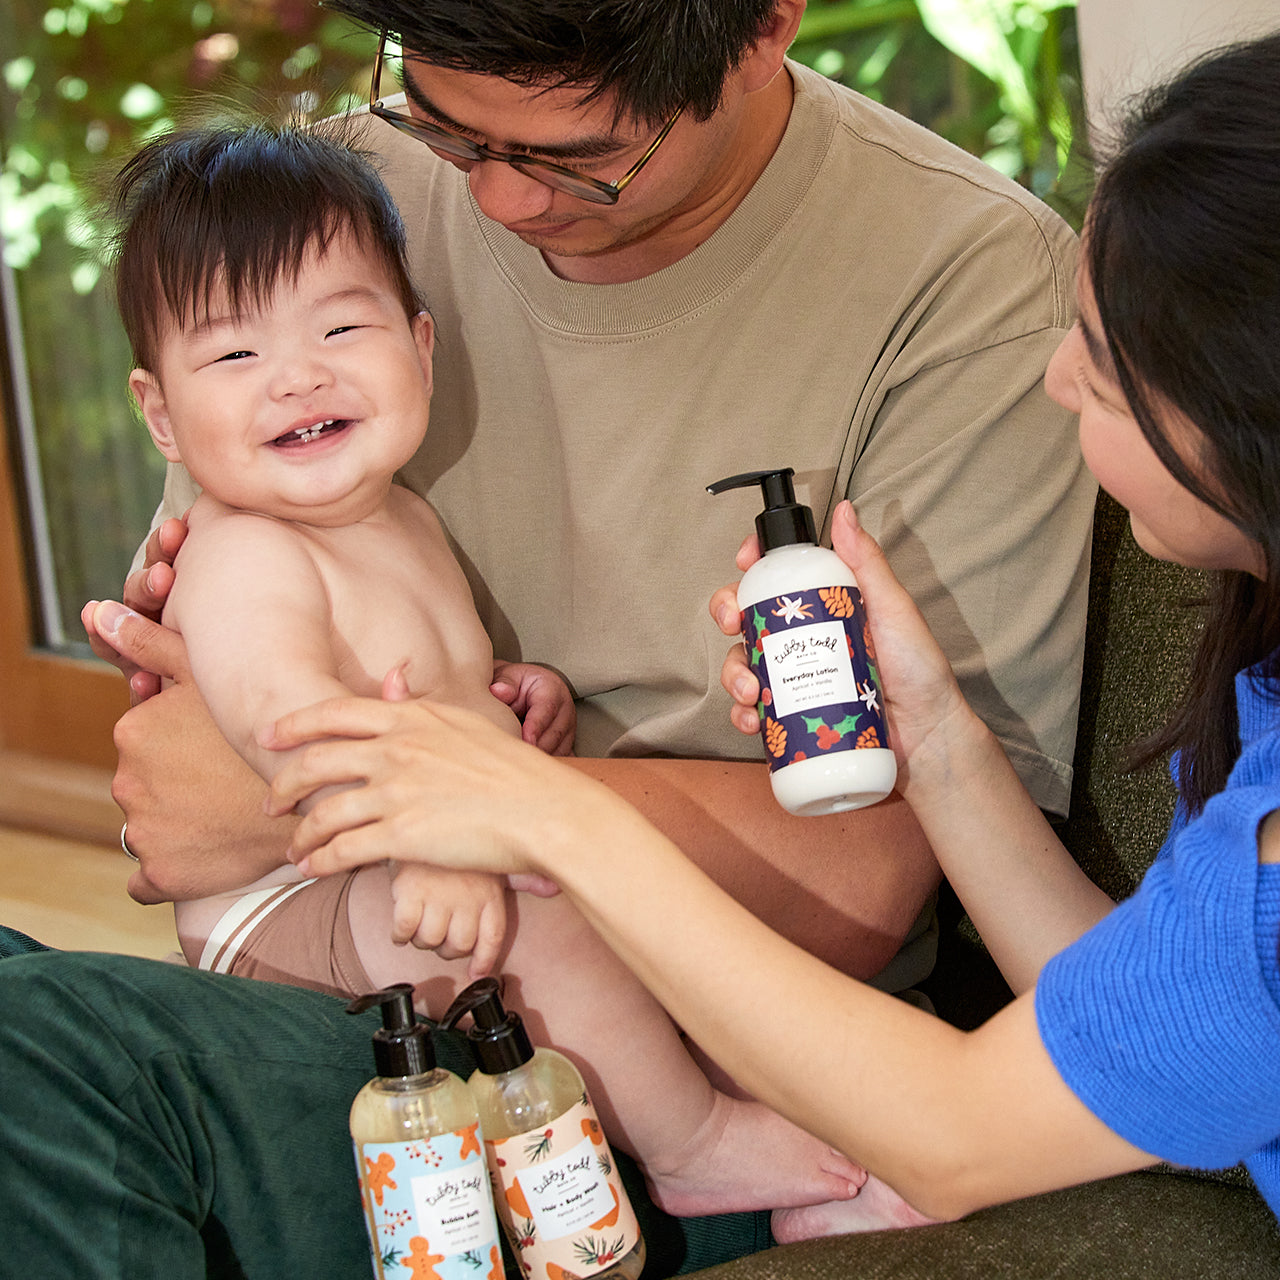 Baby boy smiling sitting on his dad's leg and his mom applying Tubby Evergreen's Everyday Lotion on his son's arm.